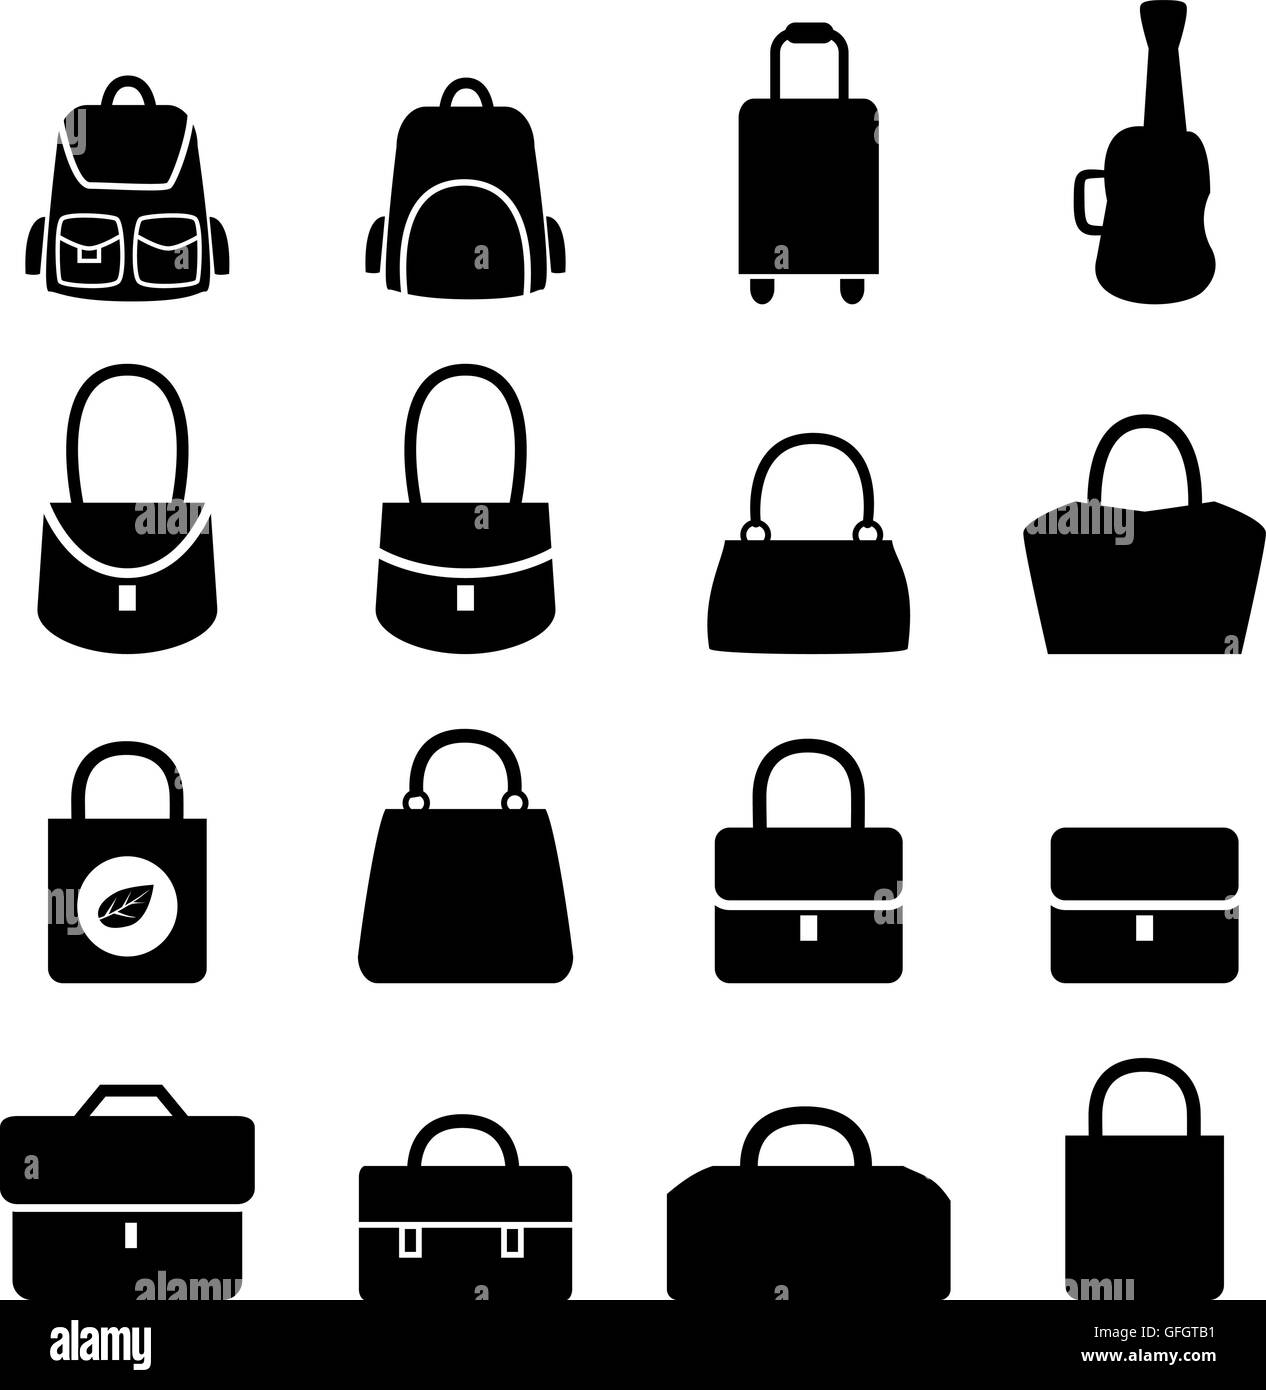 Set of bag icons in silhouette style, vector Stock Vector